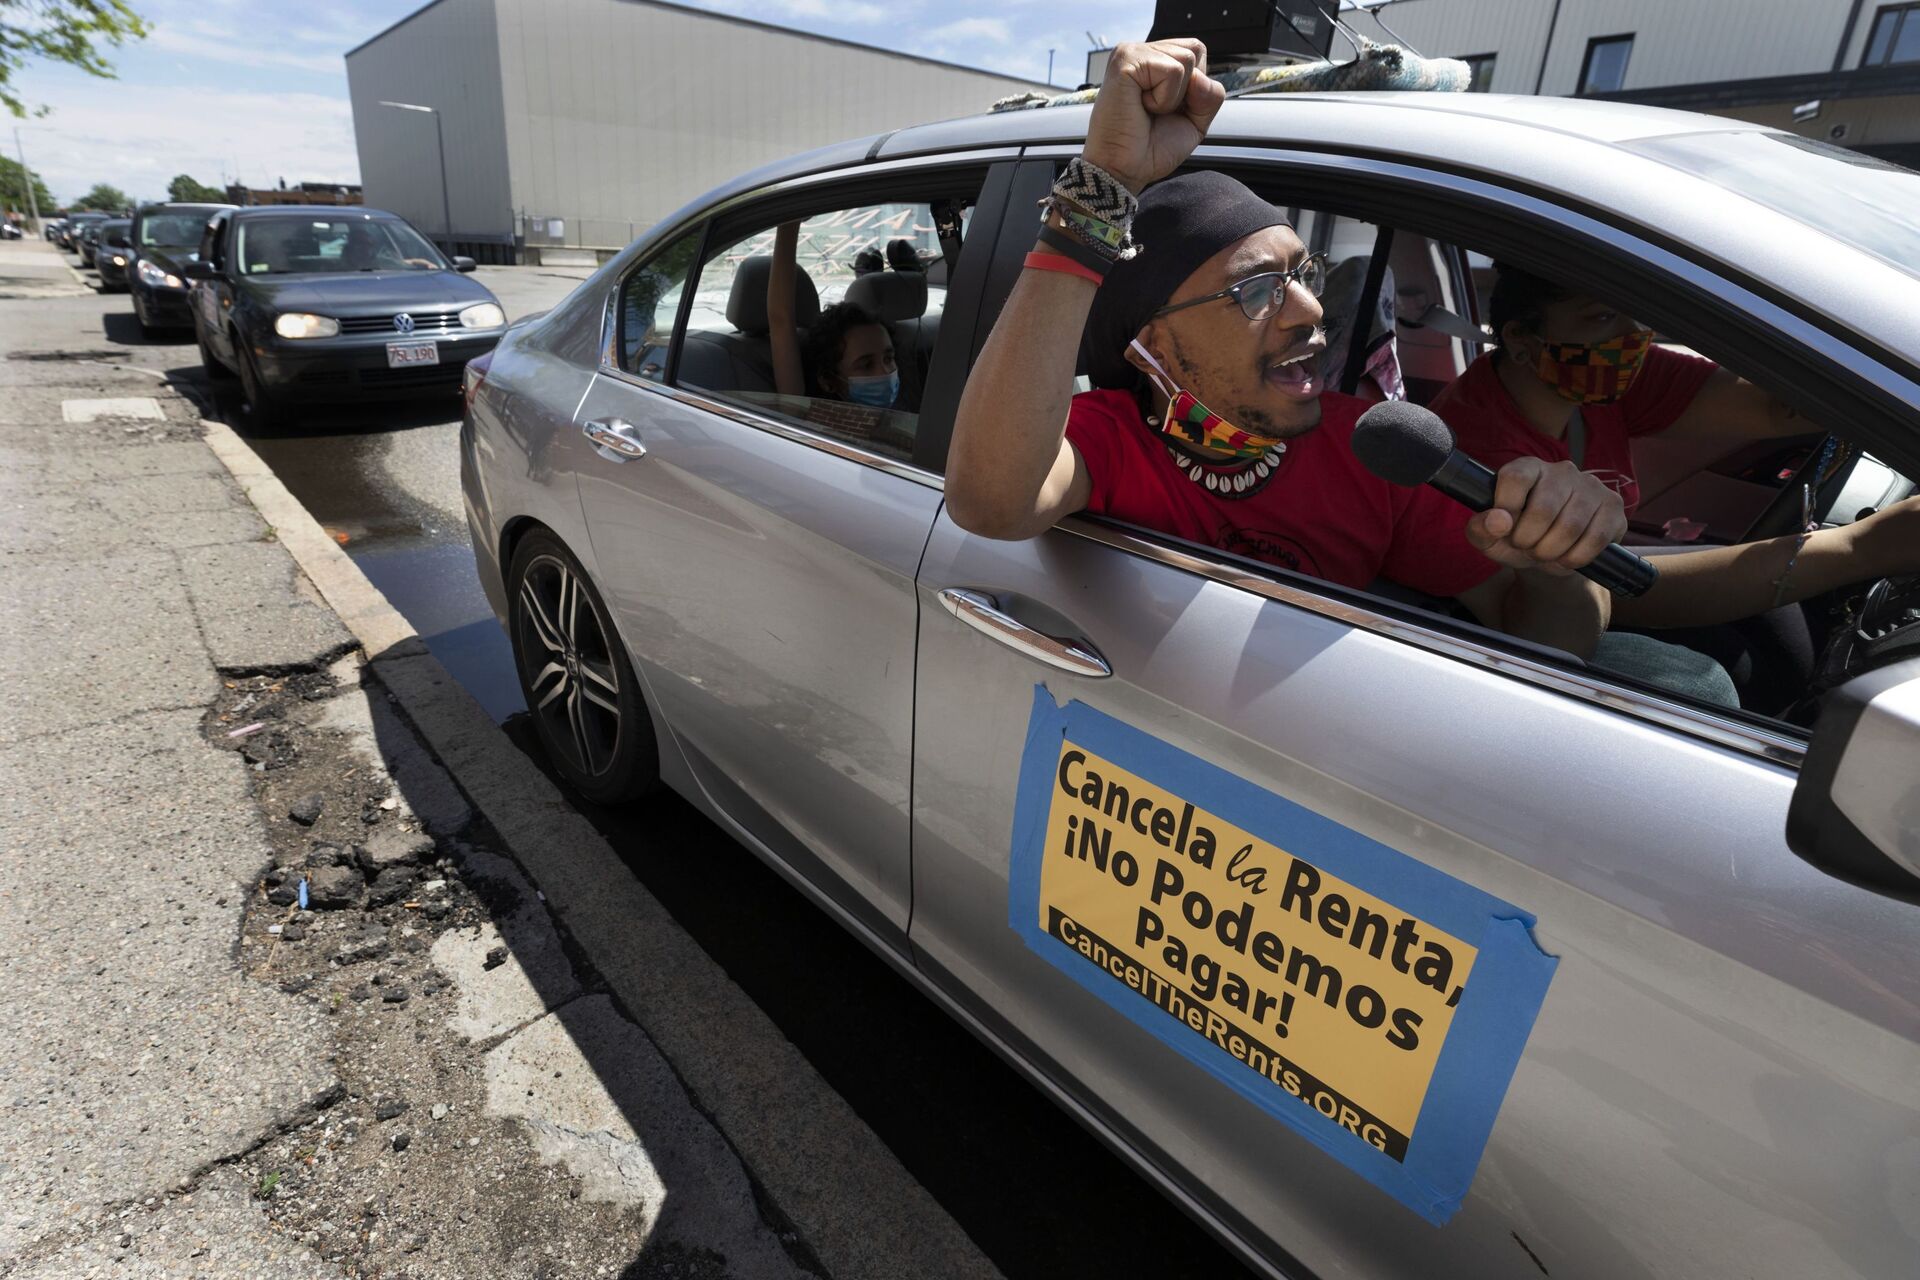 In this May 30, 2020, file photo, a car caravan calling for the cancellation of rents during the coronavirus pandemic prepares to parade through Boston. The pandemic has shut housing courts and prompted authorities around the U.S. to initiate policies protecting renters from eviction. But not everyone is covered, and some landlords are turning to threats and harassment to force tenants out. - Sputnik International, 1920, 07.09.2021